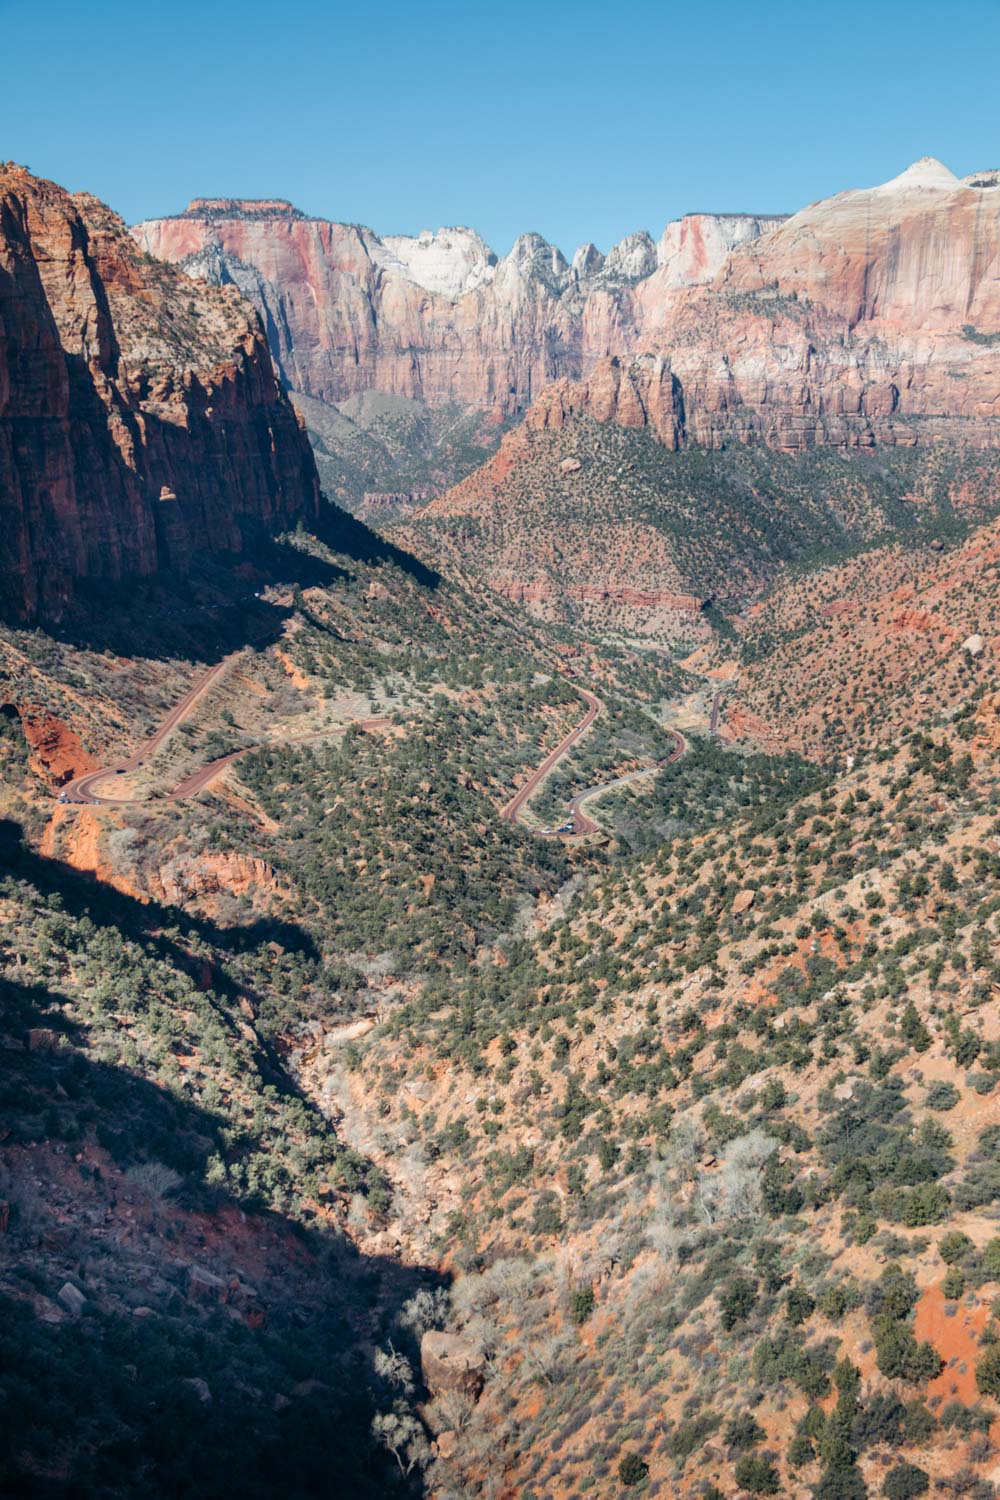 Hike Zion Canyon Overlook Trail - Roads and Destinations